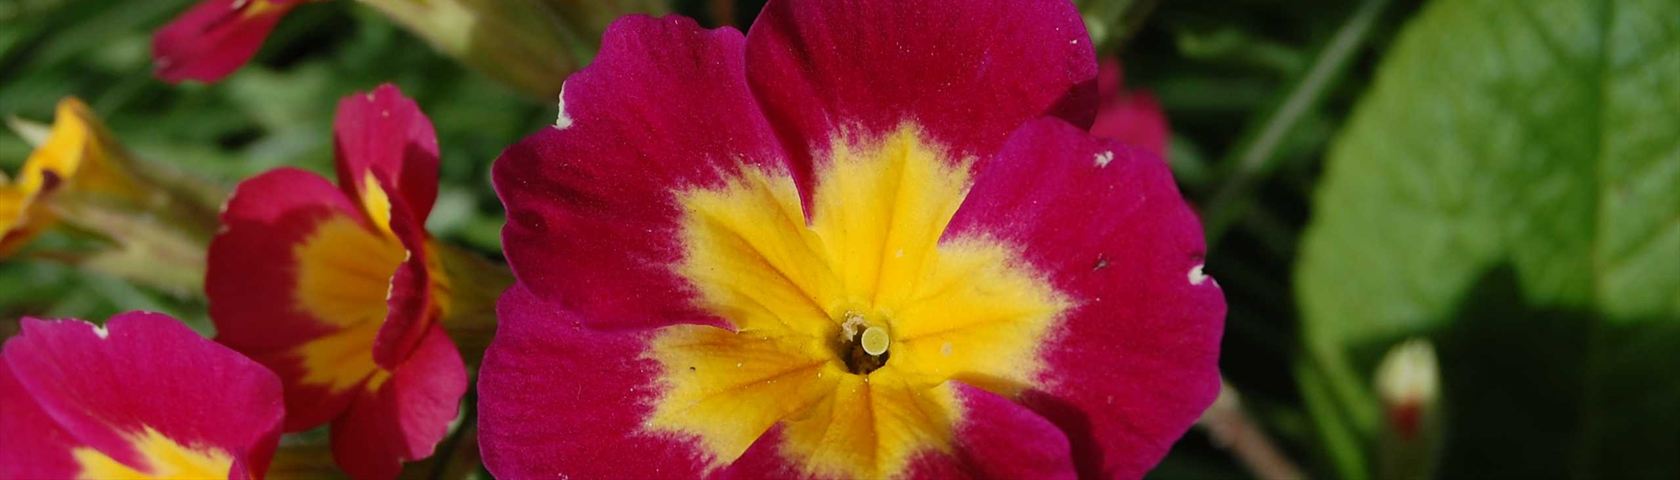 Red and Yellow Pansies